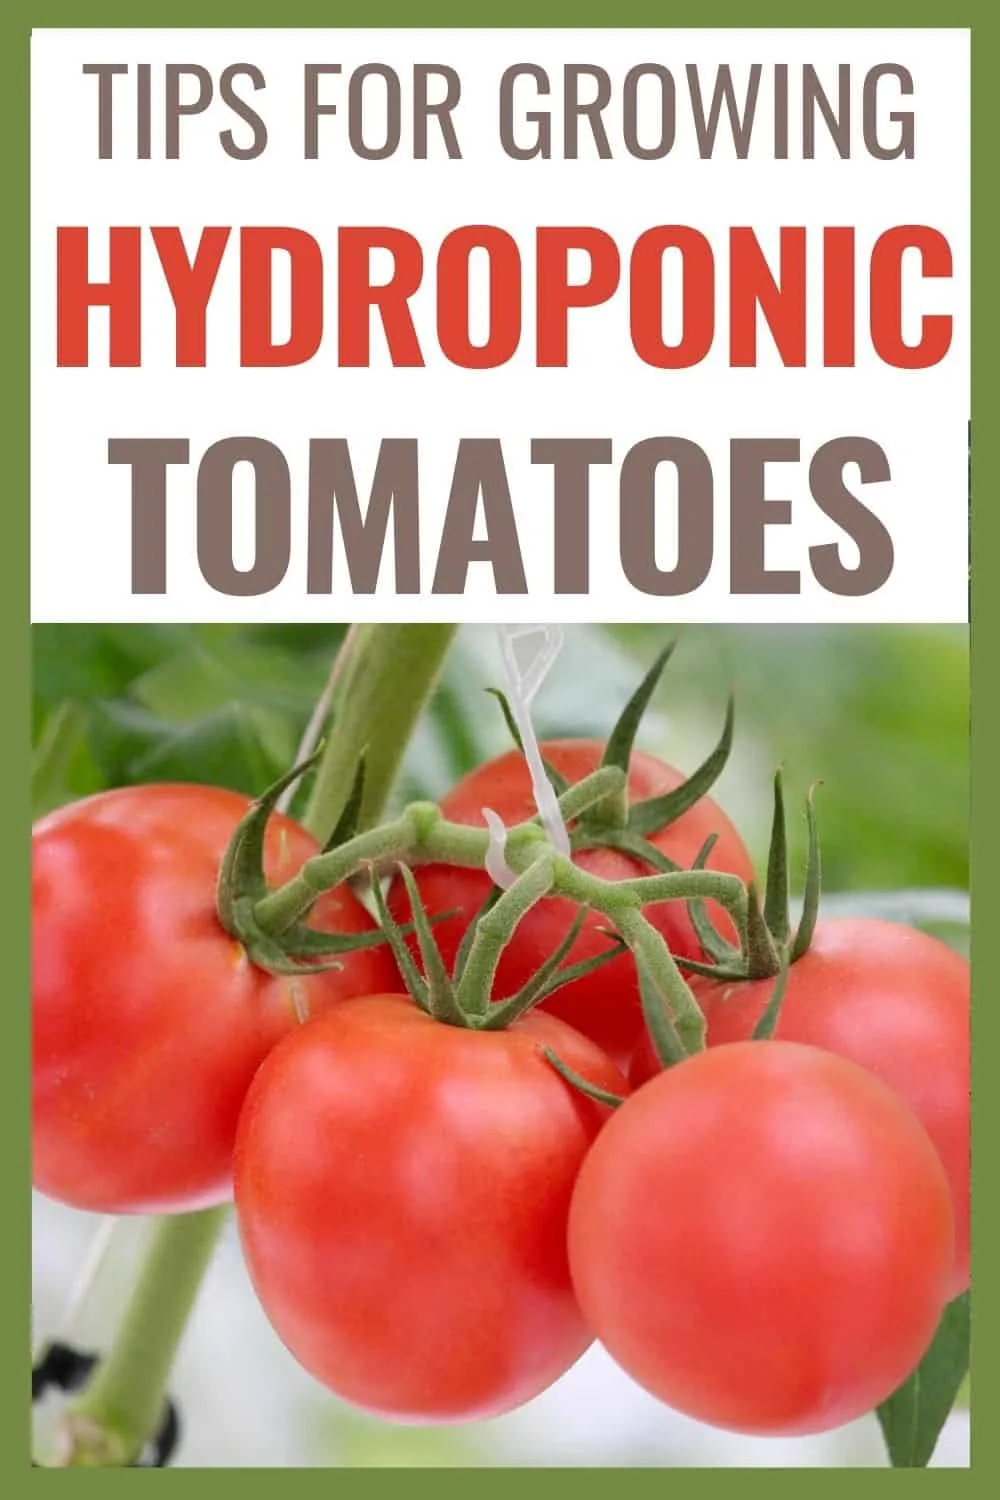 Tips for growing hydroponic tomatoes